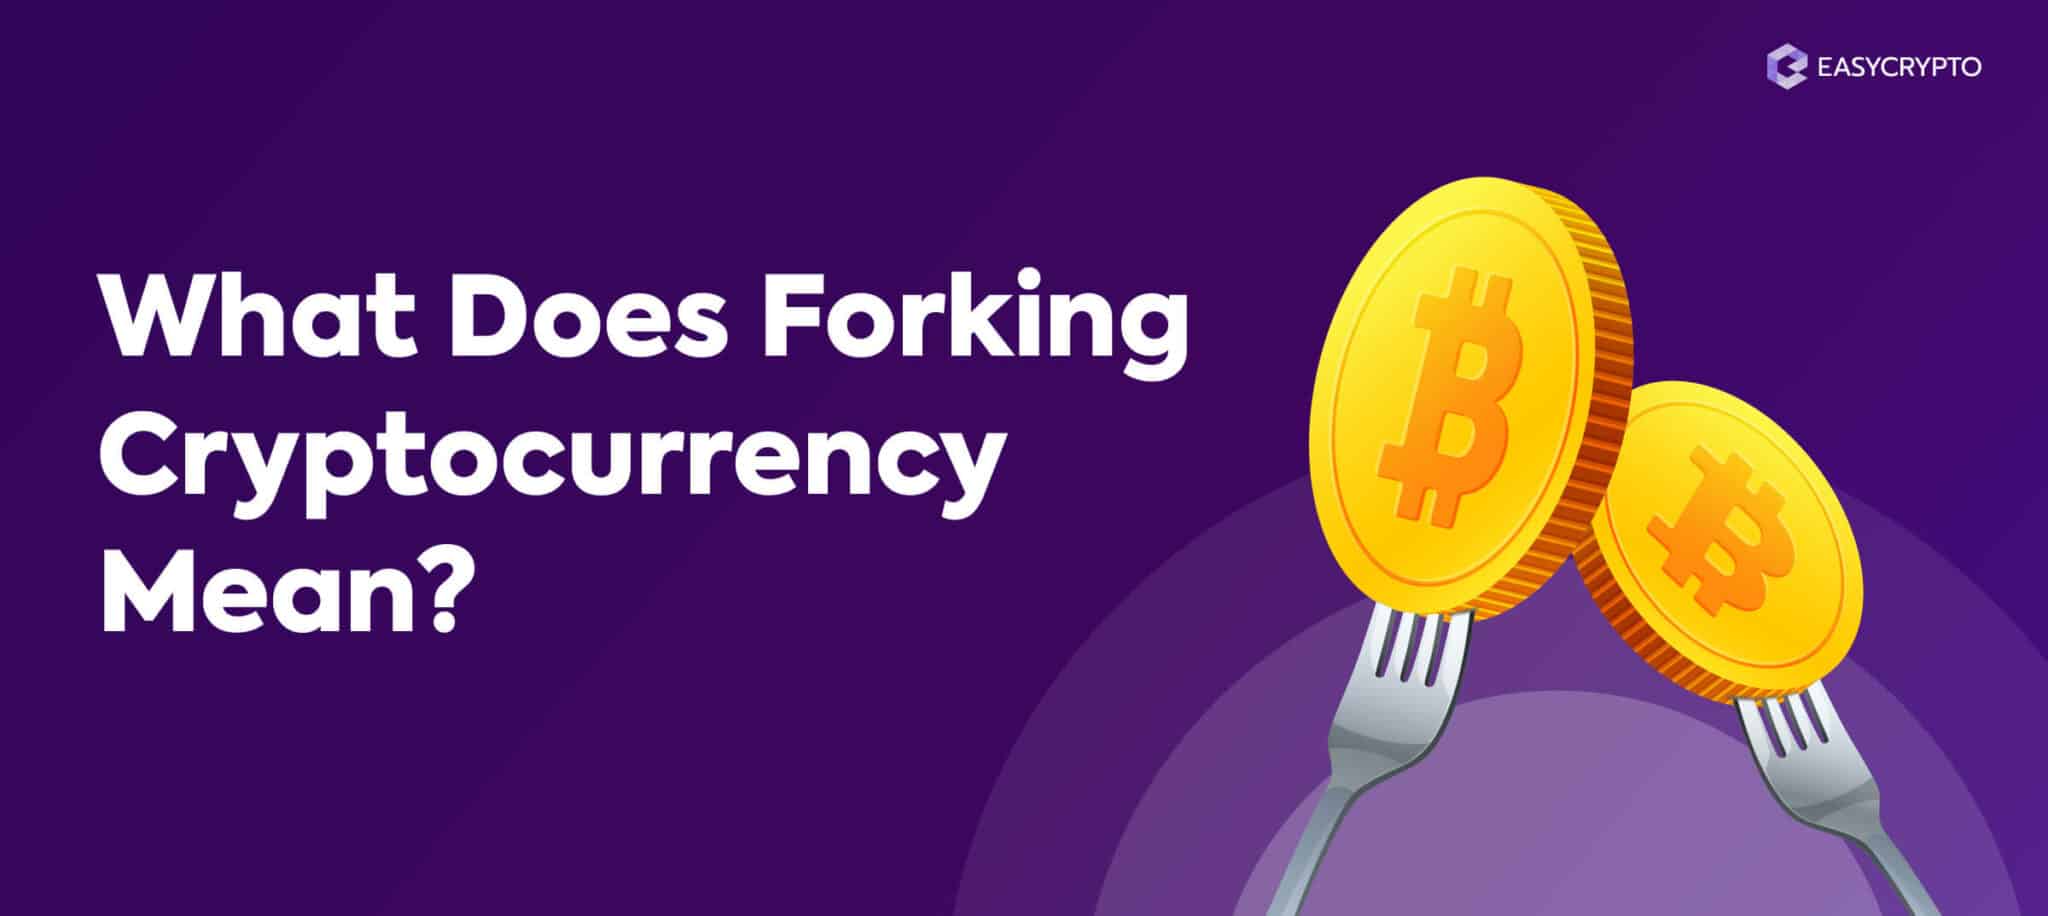 forking crypto currency news